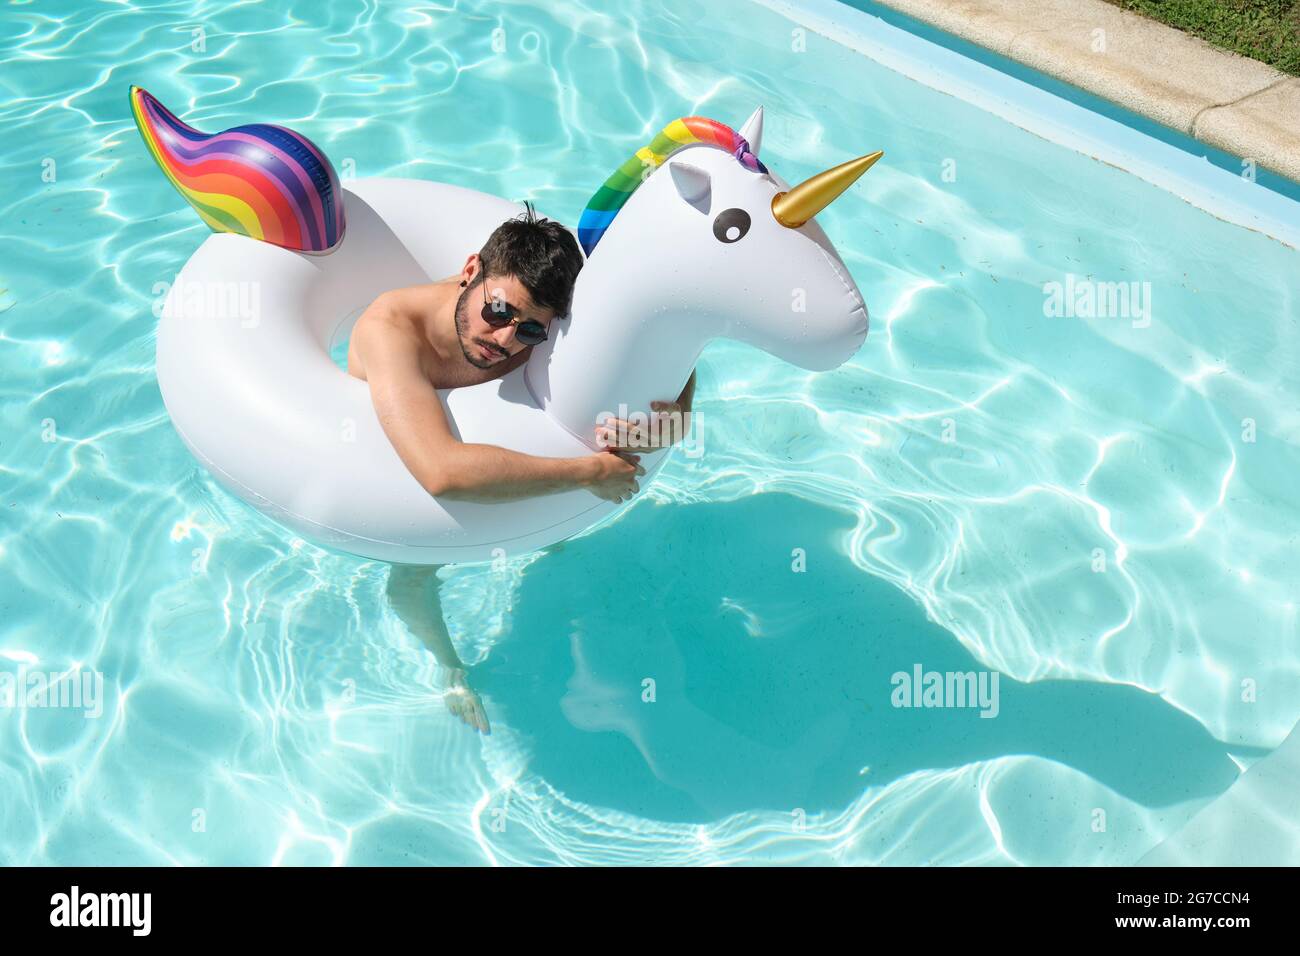 Young man wearing sunglasses hugging a big unicorn inflatable ring in a swimming pool. Summer concept. Stock Photo